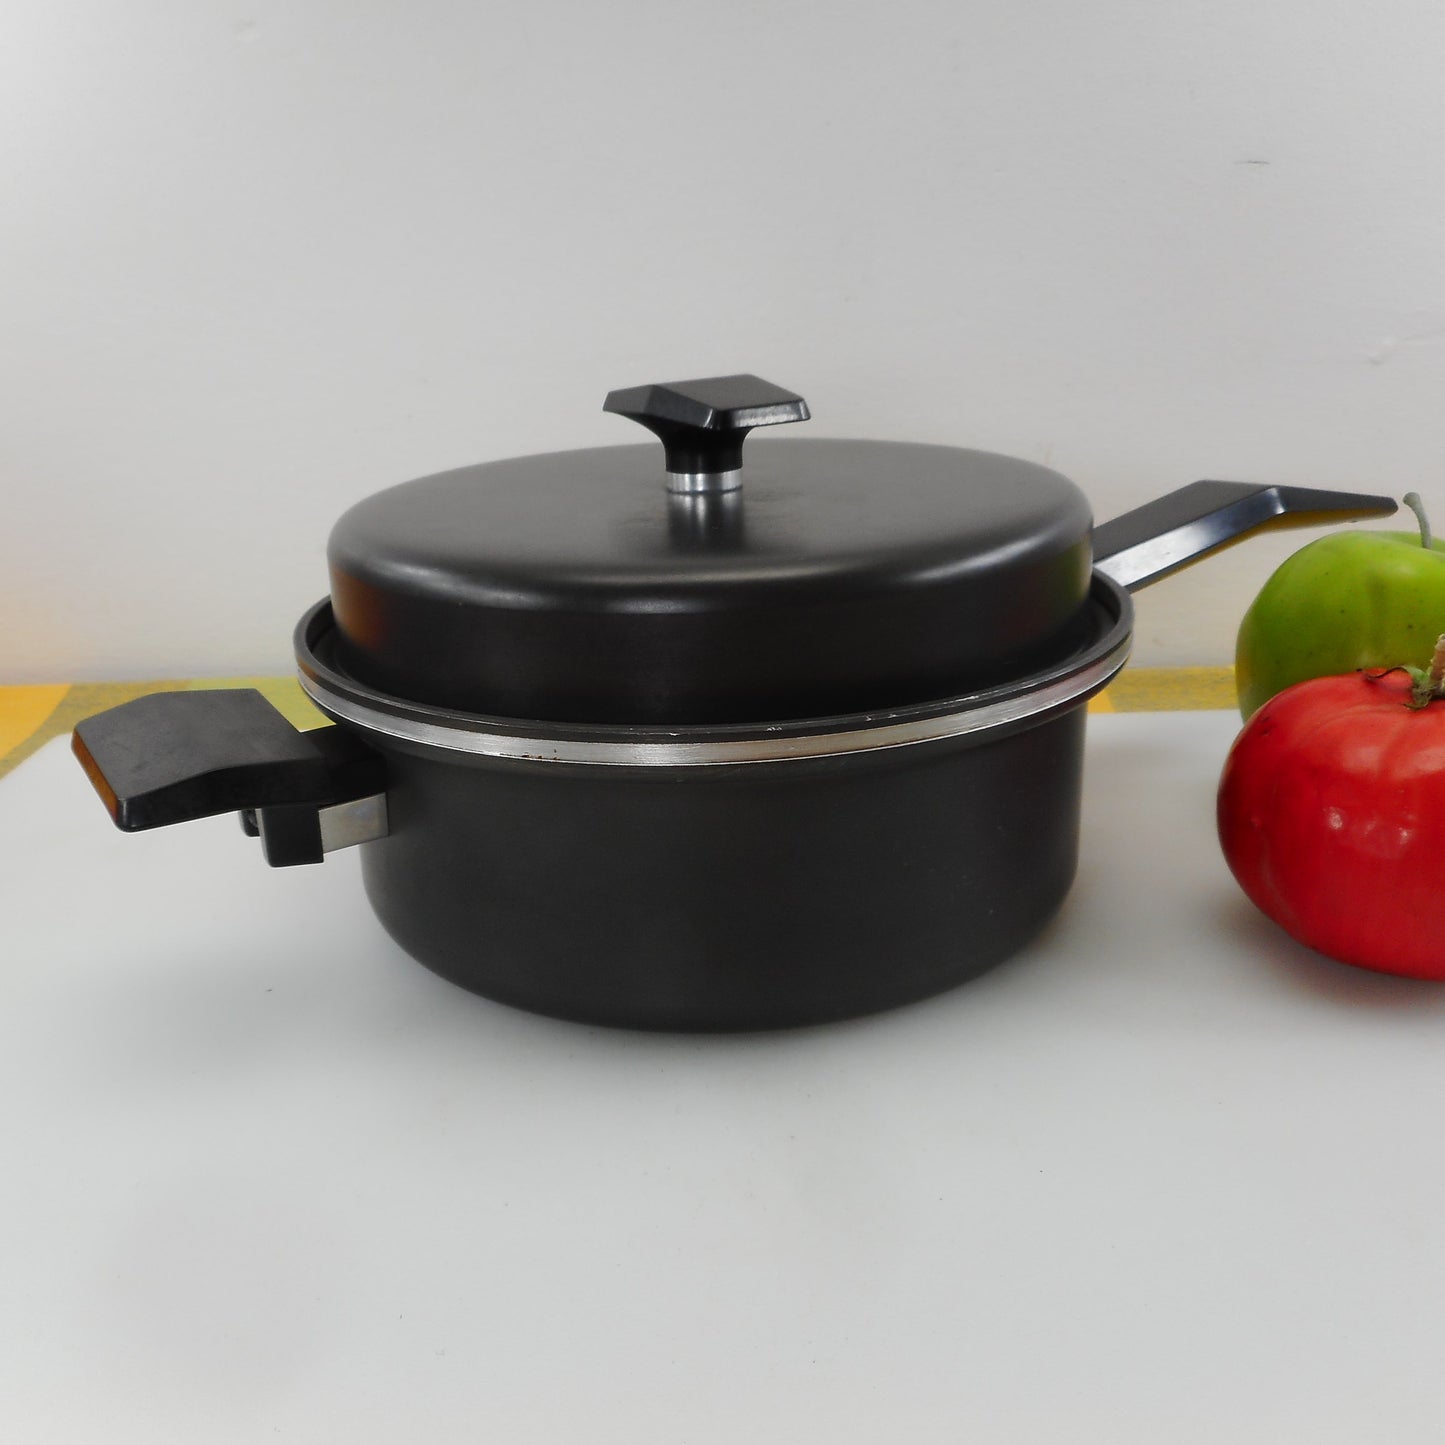 West Bend Miracle Maid Anodized 2 Quart Saucepan & Lid